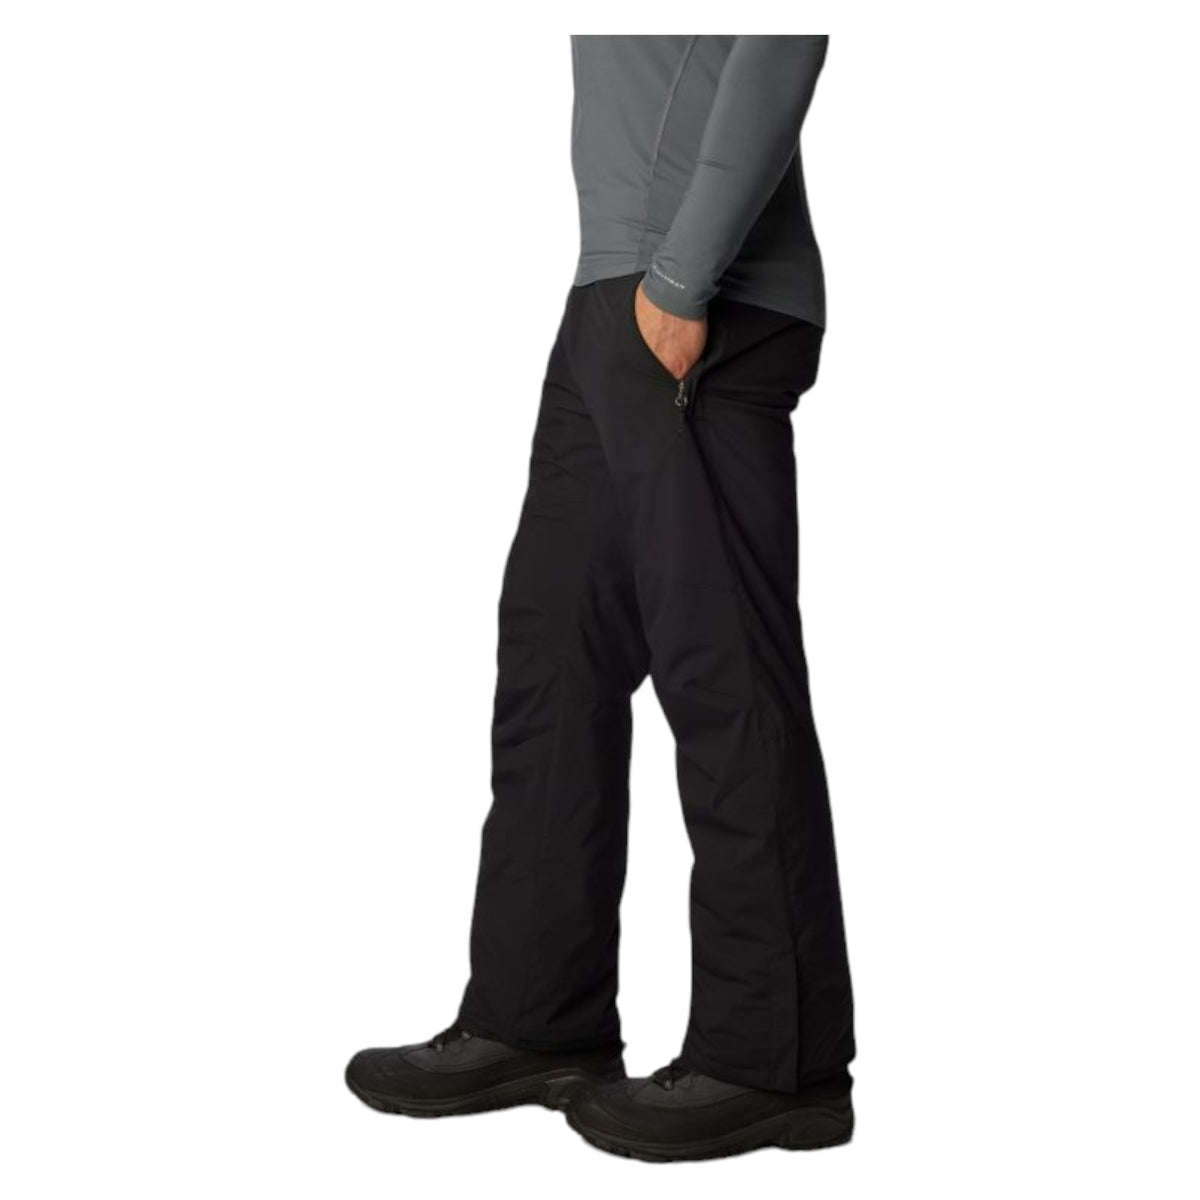 Columbia Shafer Canyon ski trousers in black